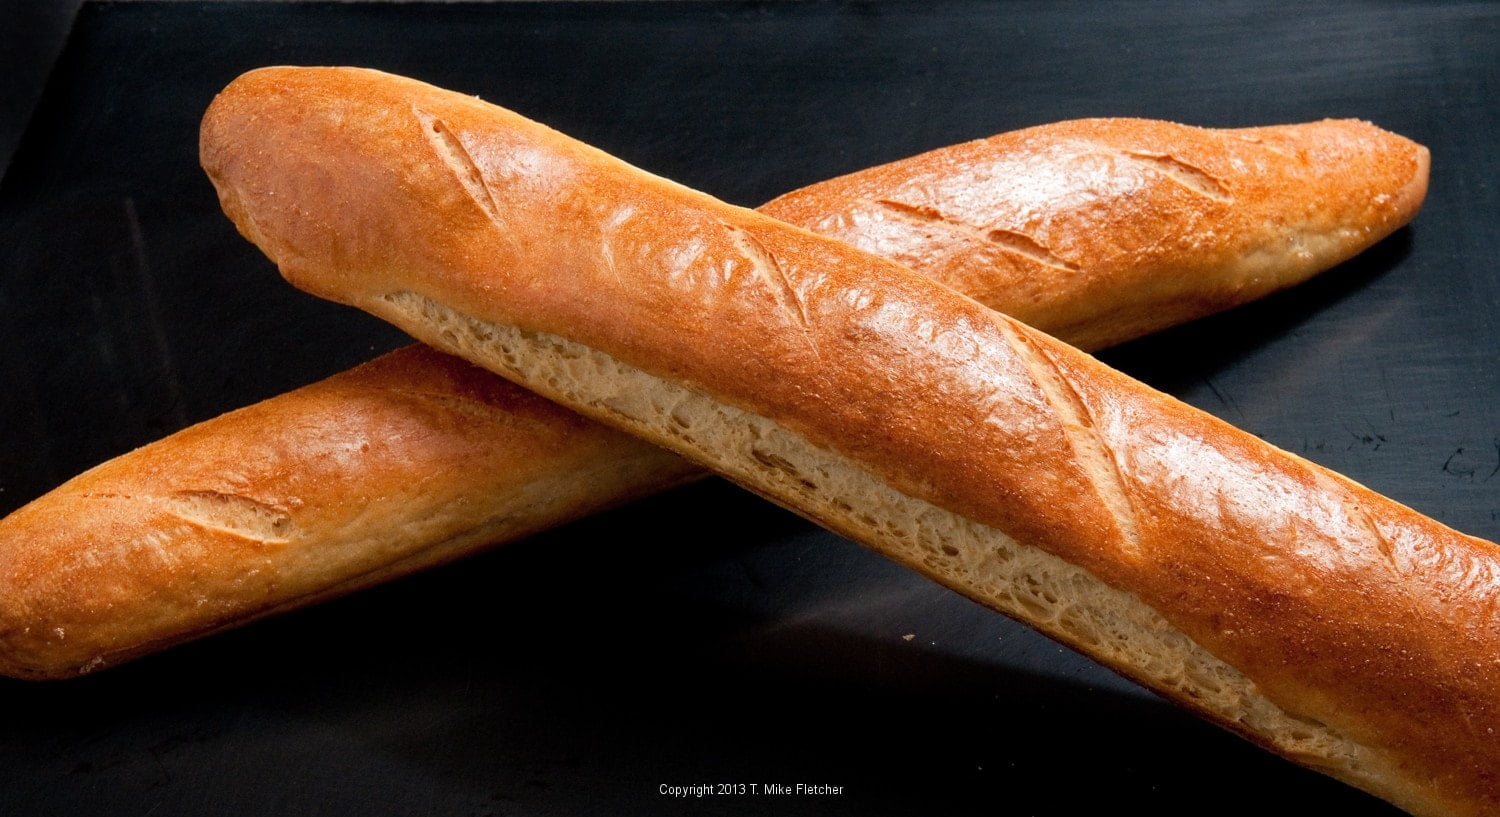 Wine and Cheese Baguettes - A Favorite Bread www.pastrieslikeapro.com